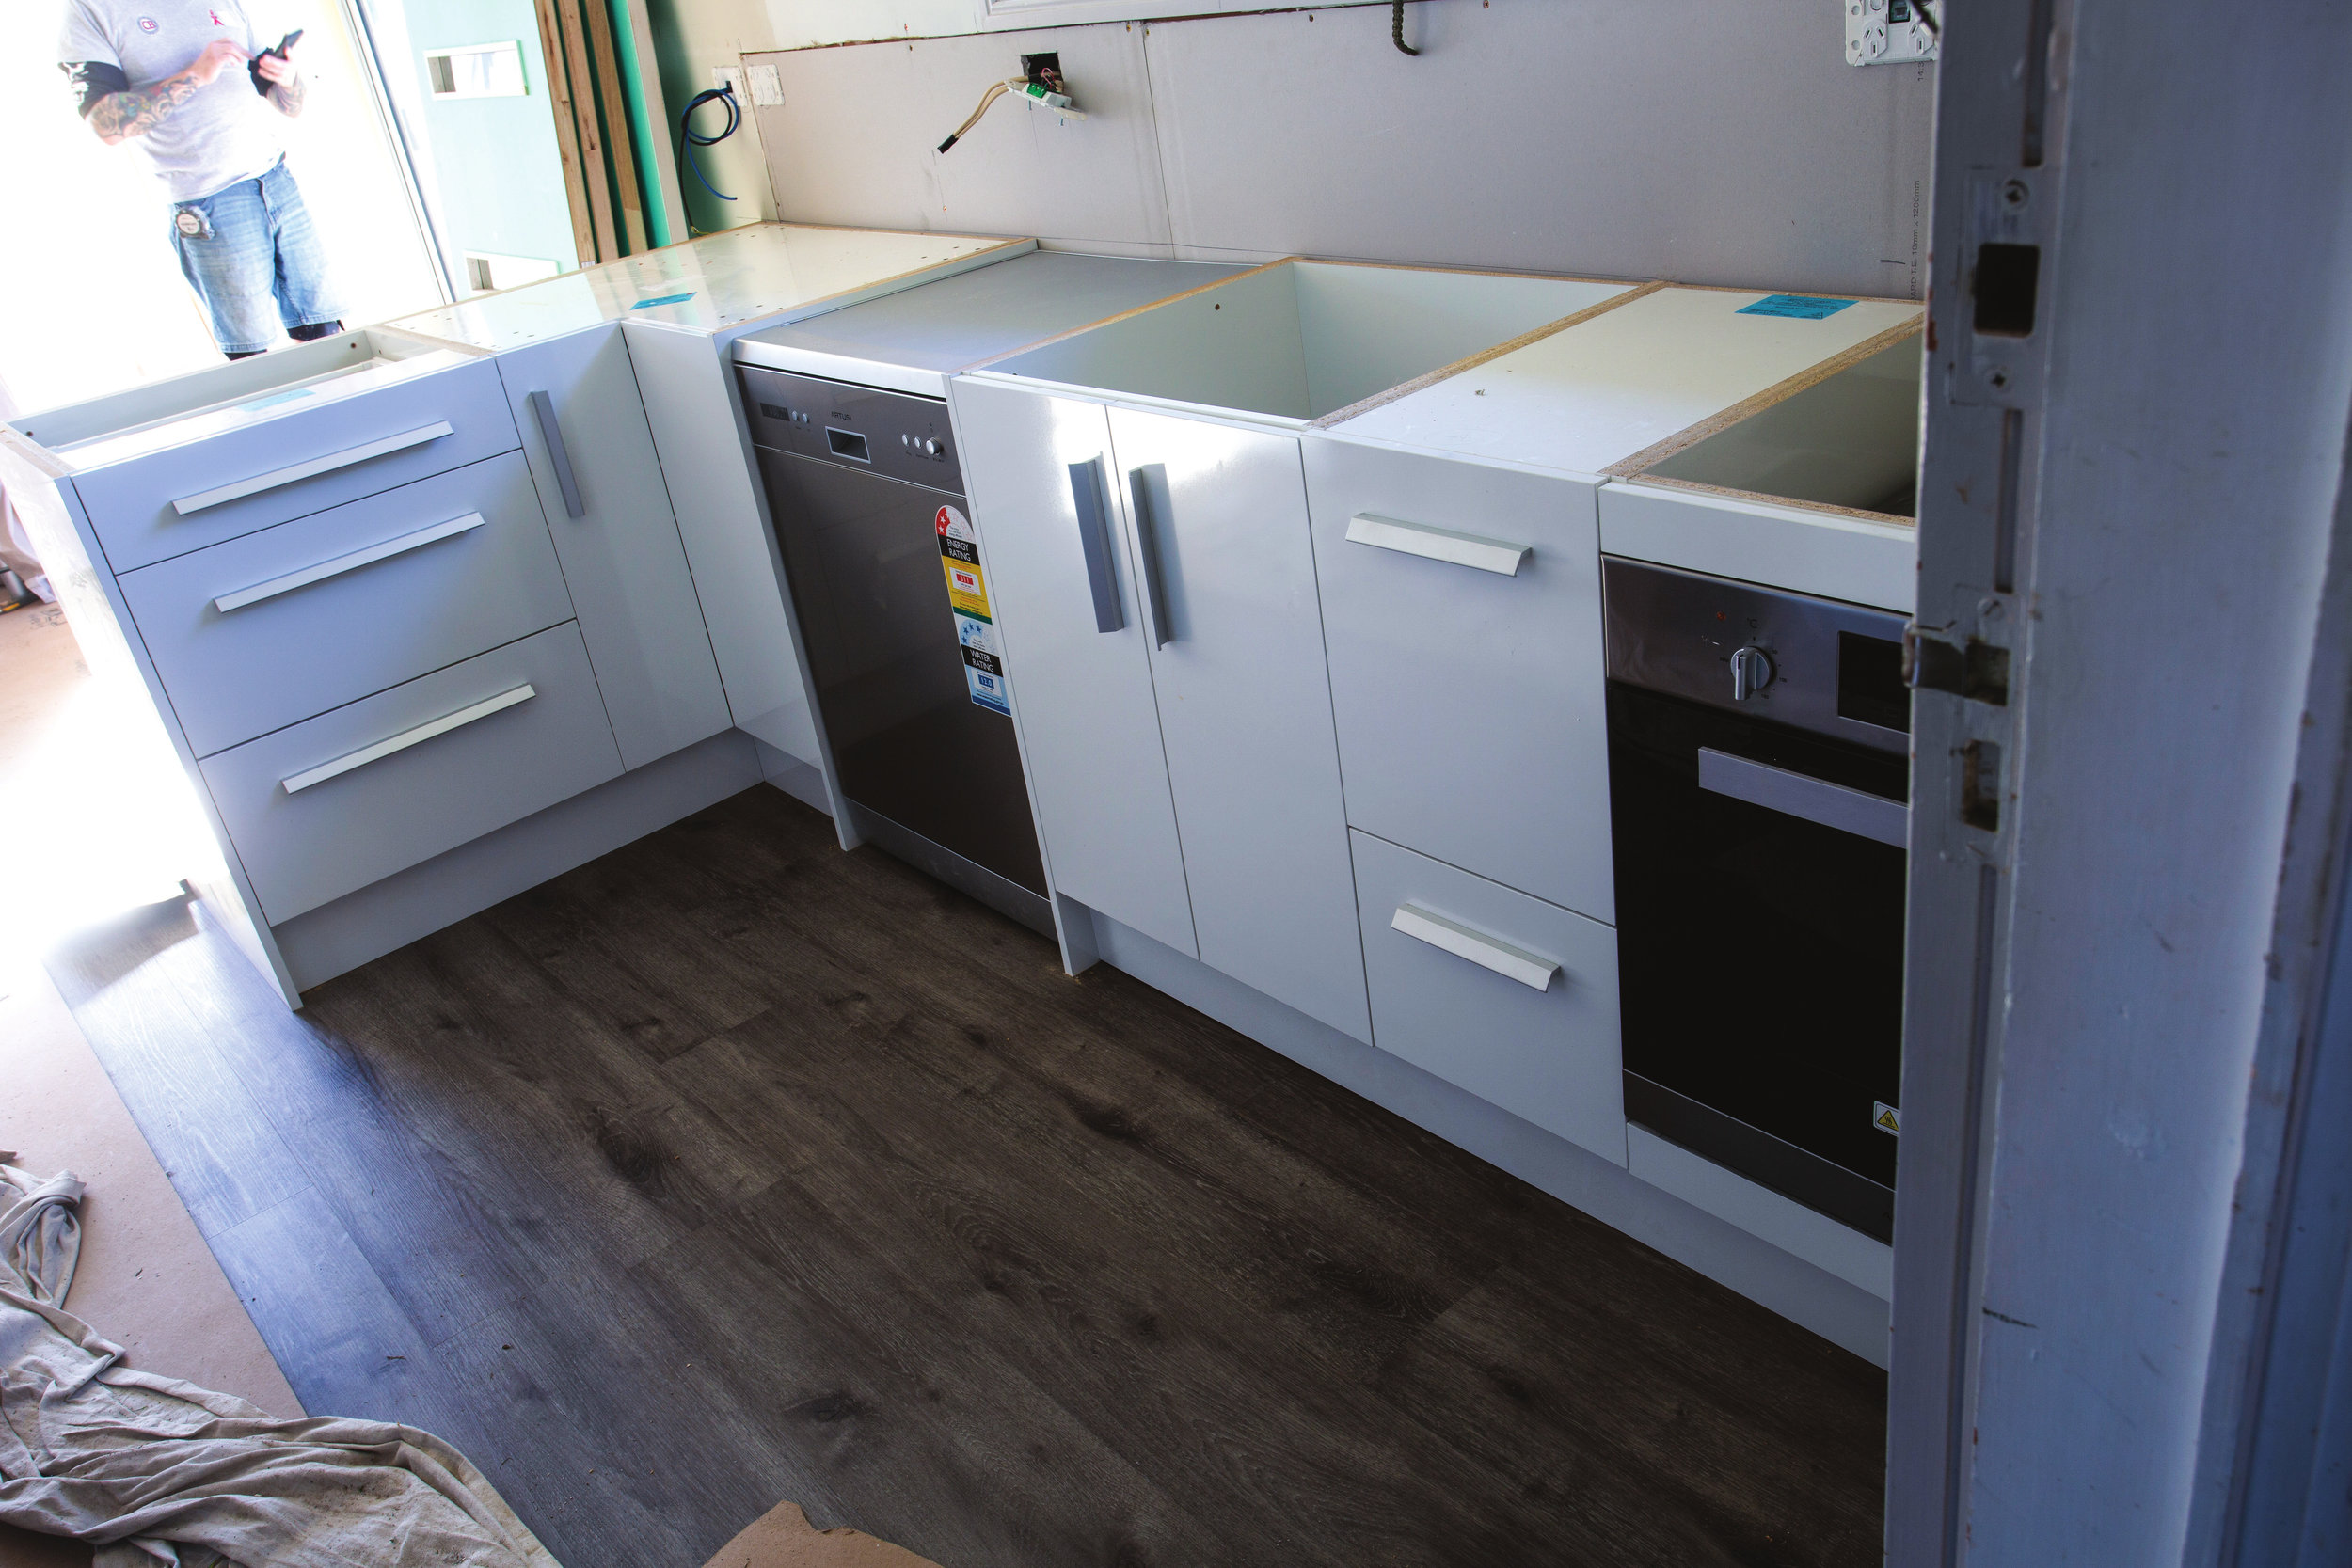 Our completed, installed flat-pack kitchen, just waiting for the bench top to finish off the job